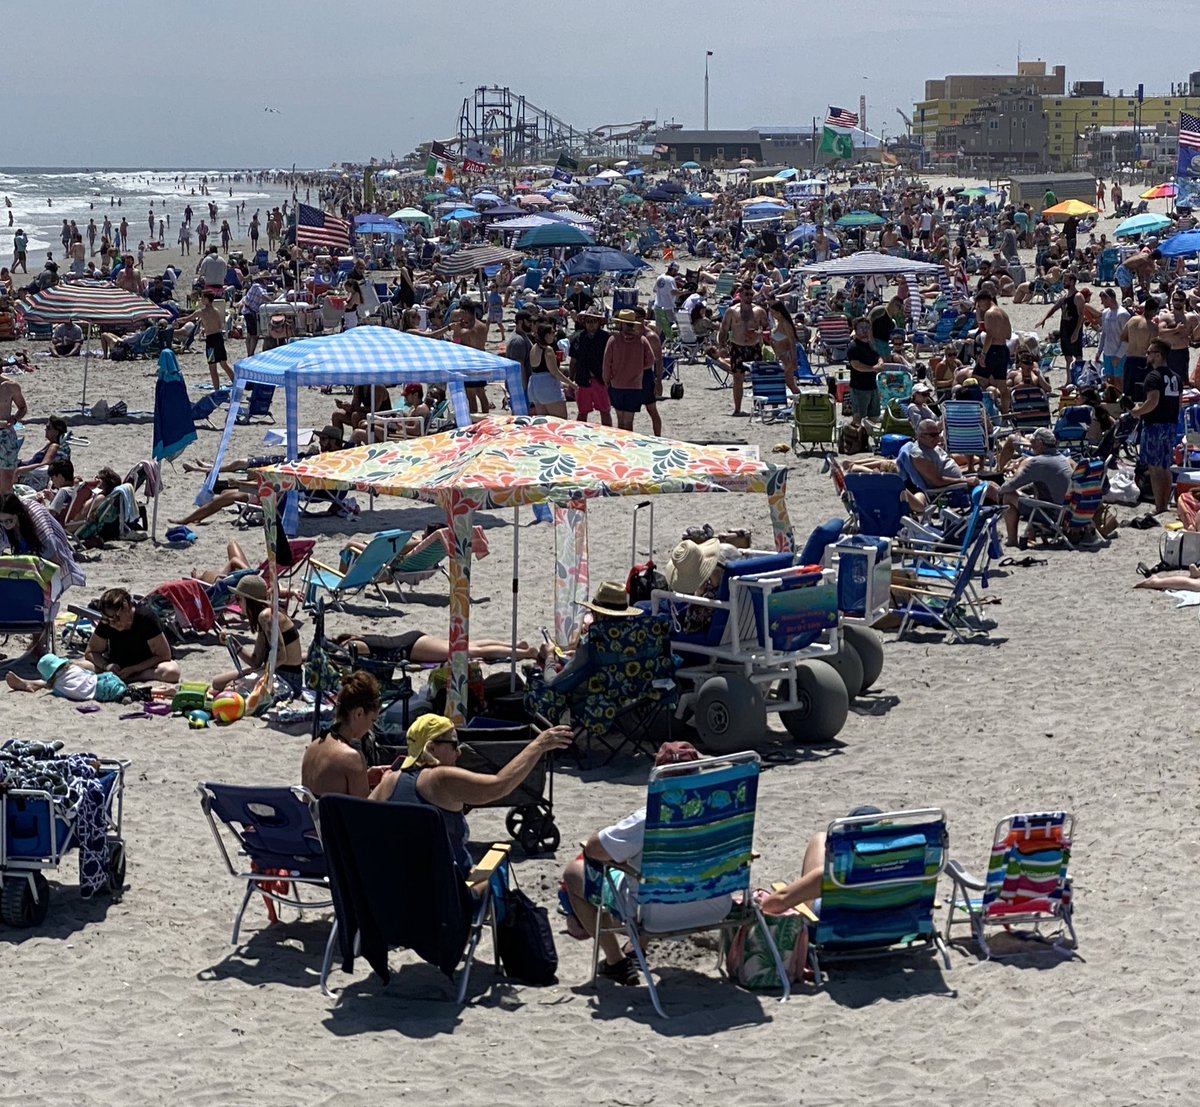 New 10pm teen curfew and beach tent ban in North Wildwood are now in effect. Gearing up for unofficial start of summer tonight at 10pm on @FOX29philly